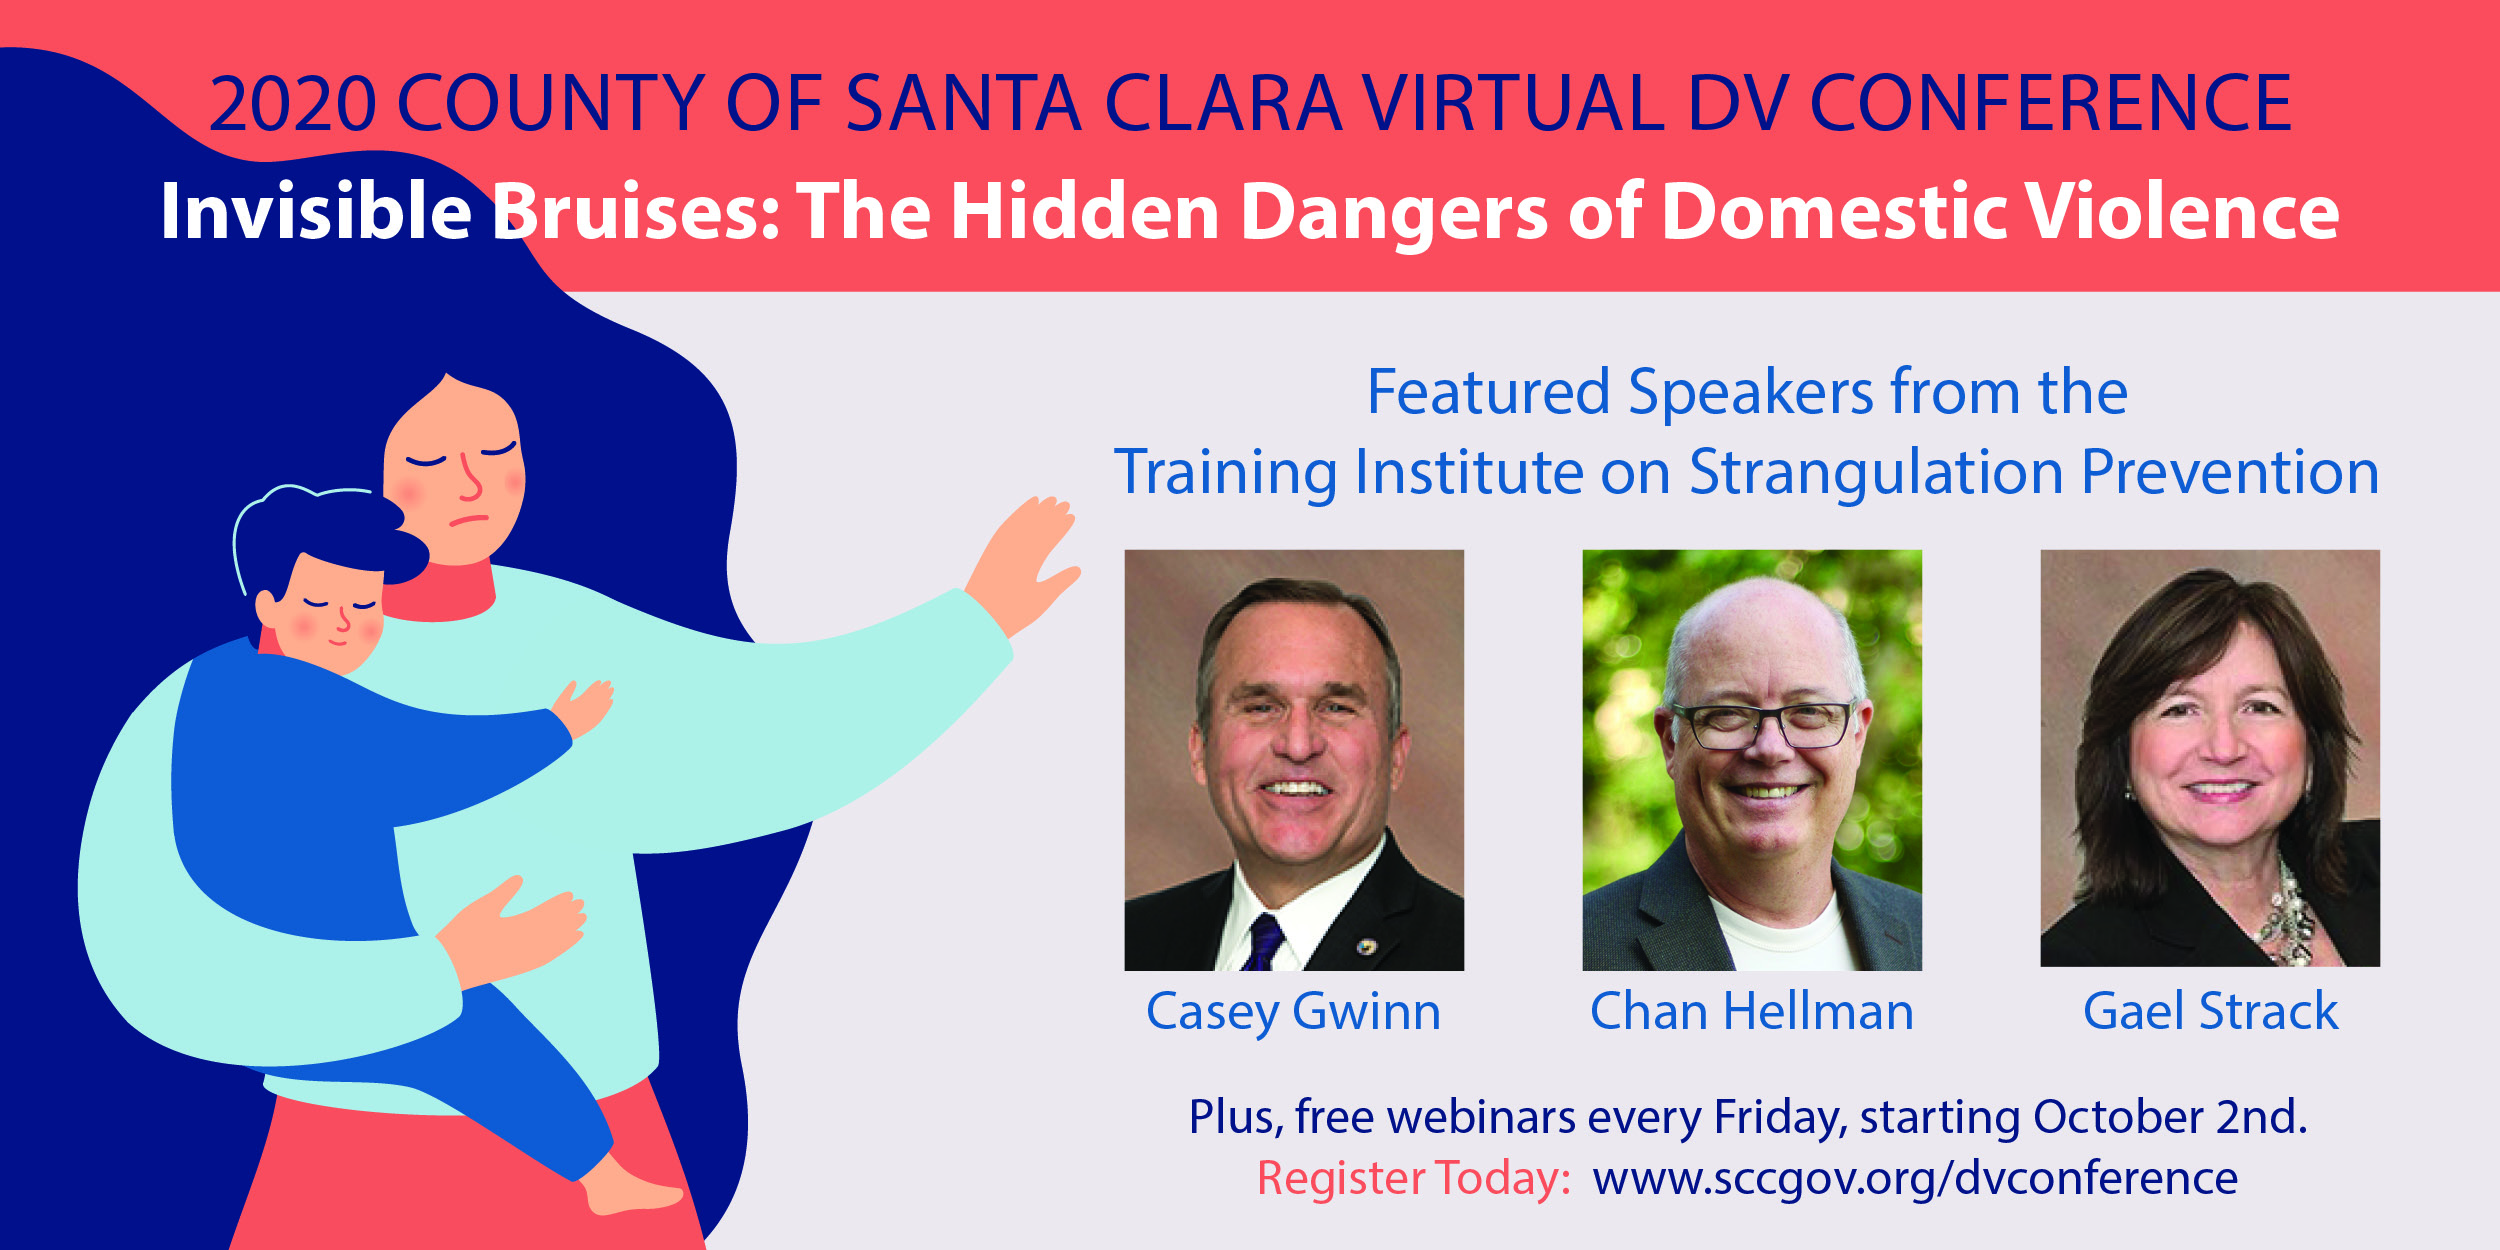 Santa Clara County Virtual DV Conference, Promotion flyer with featured speakers